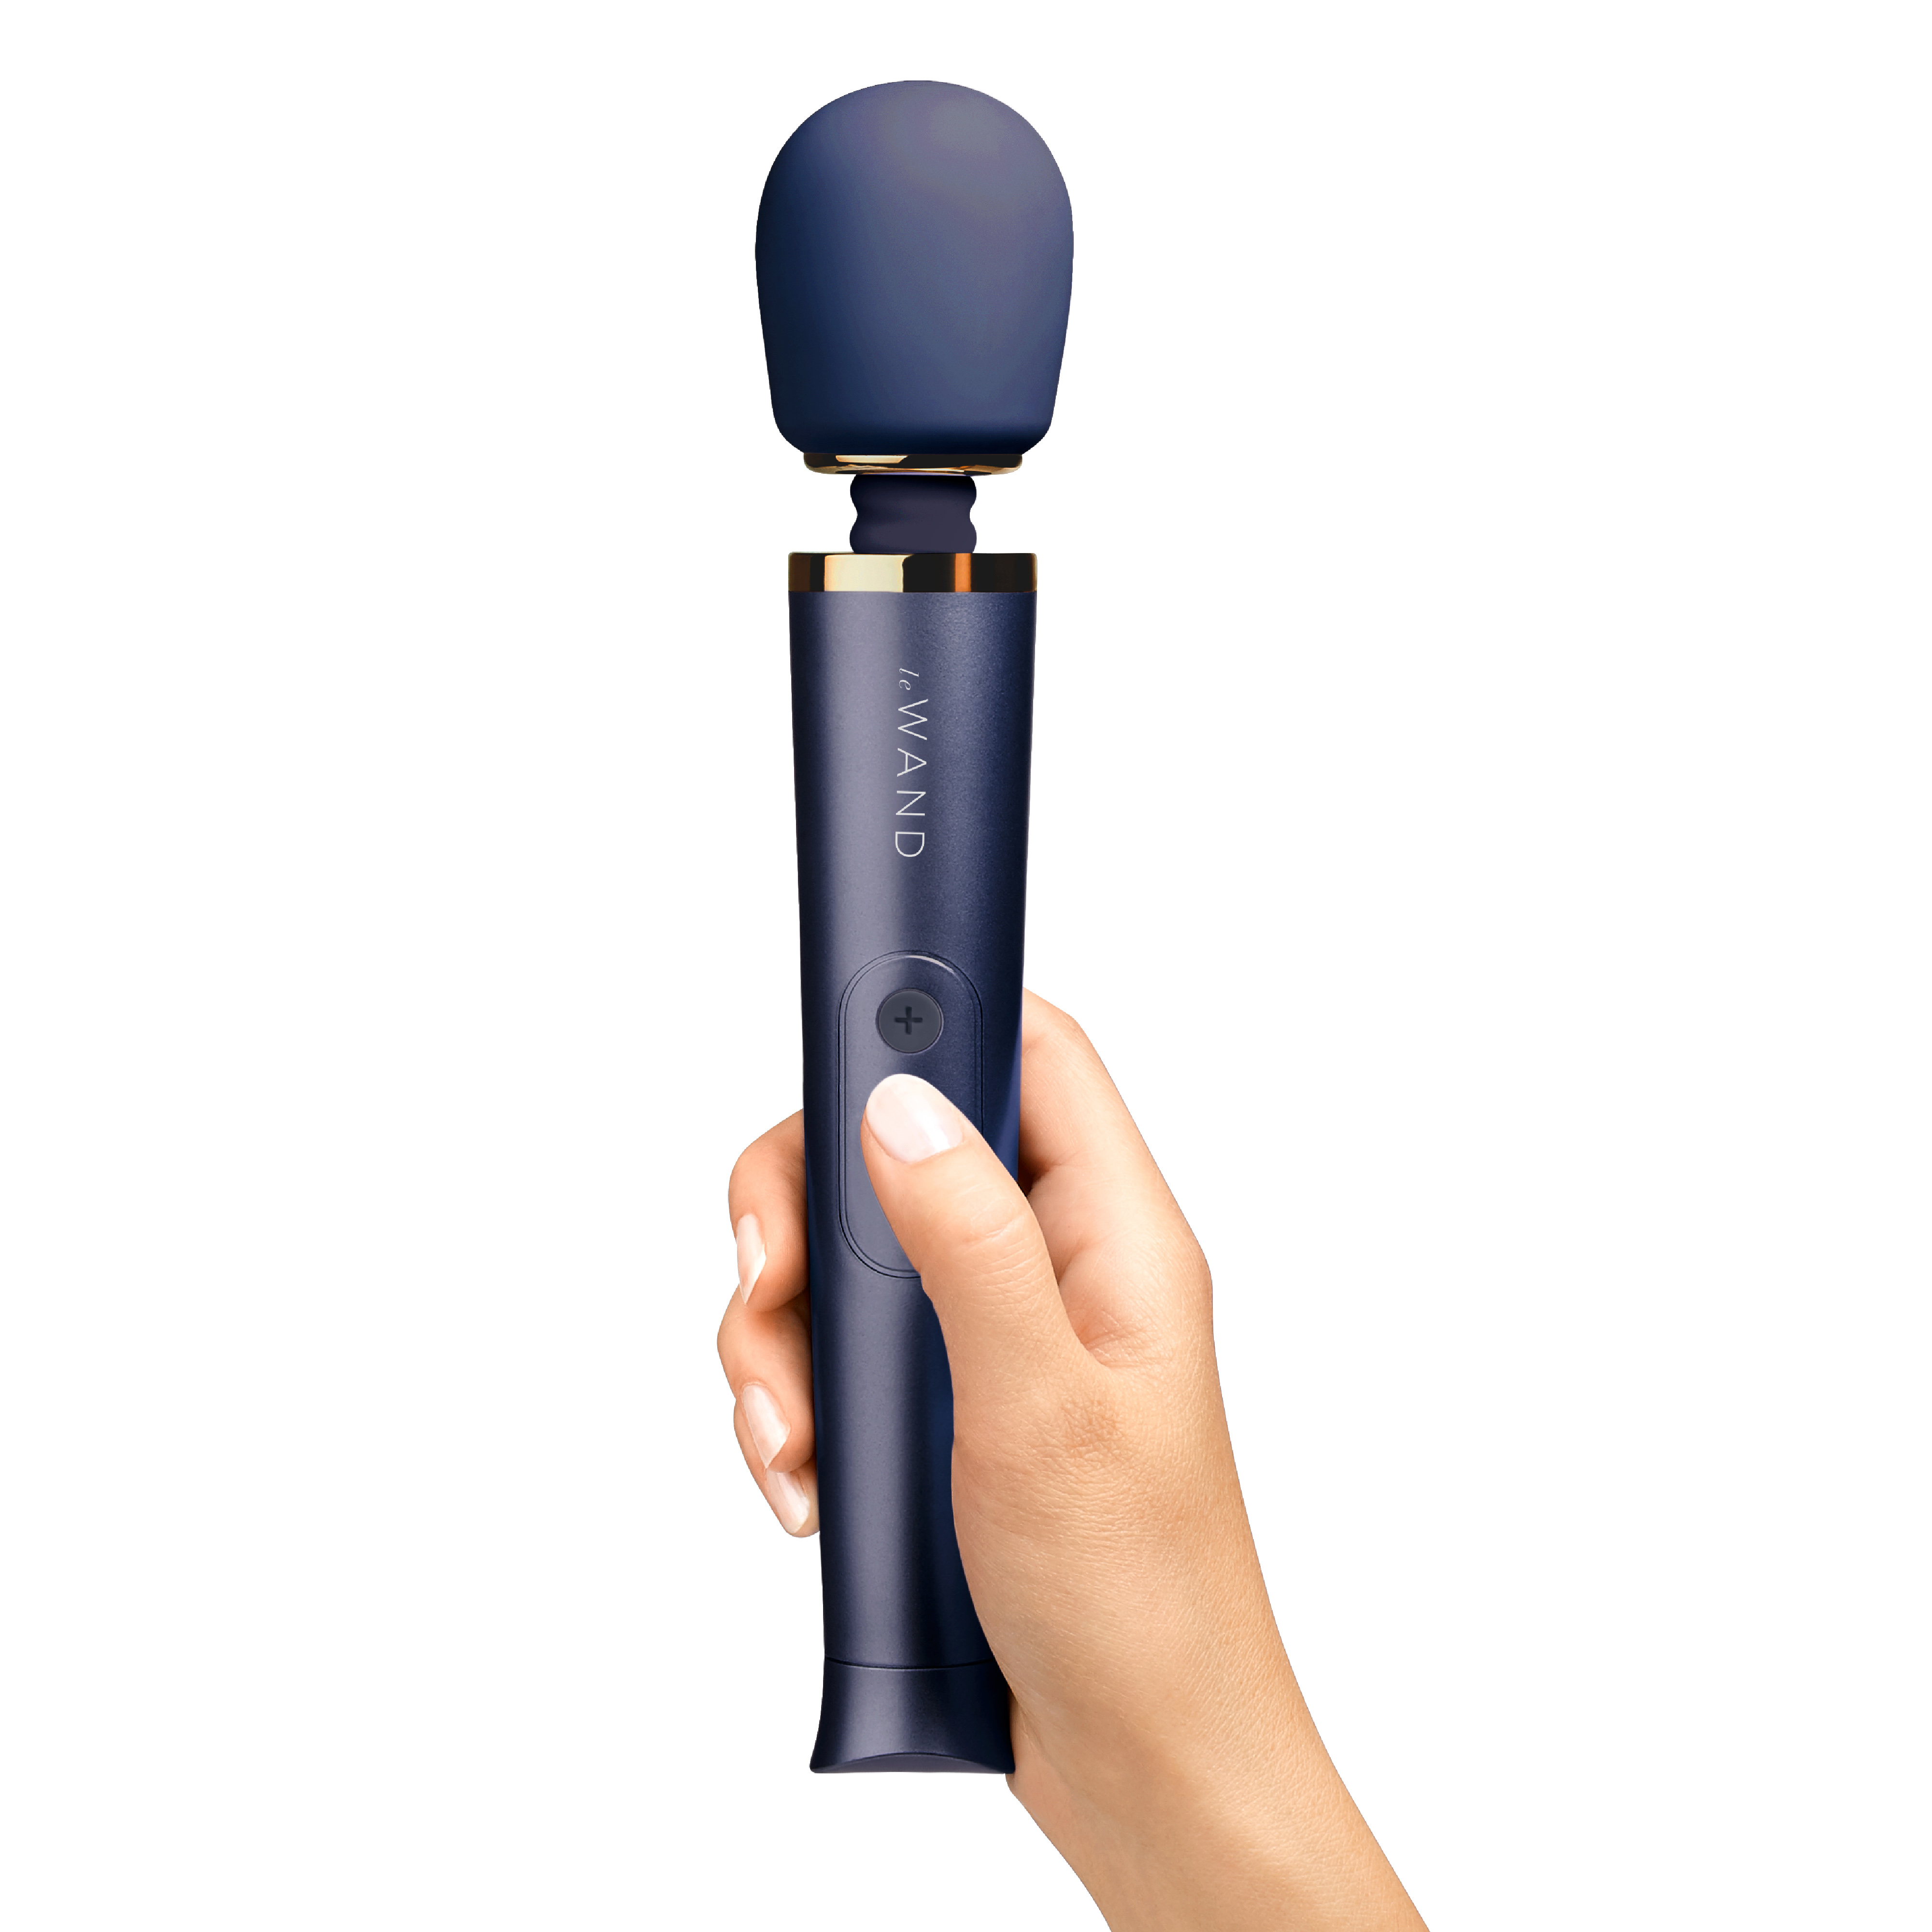 Le Wand Petite Navy rechargeable massager